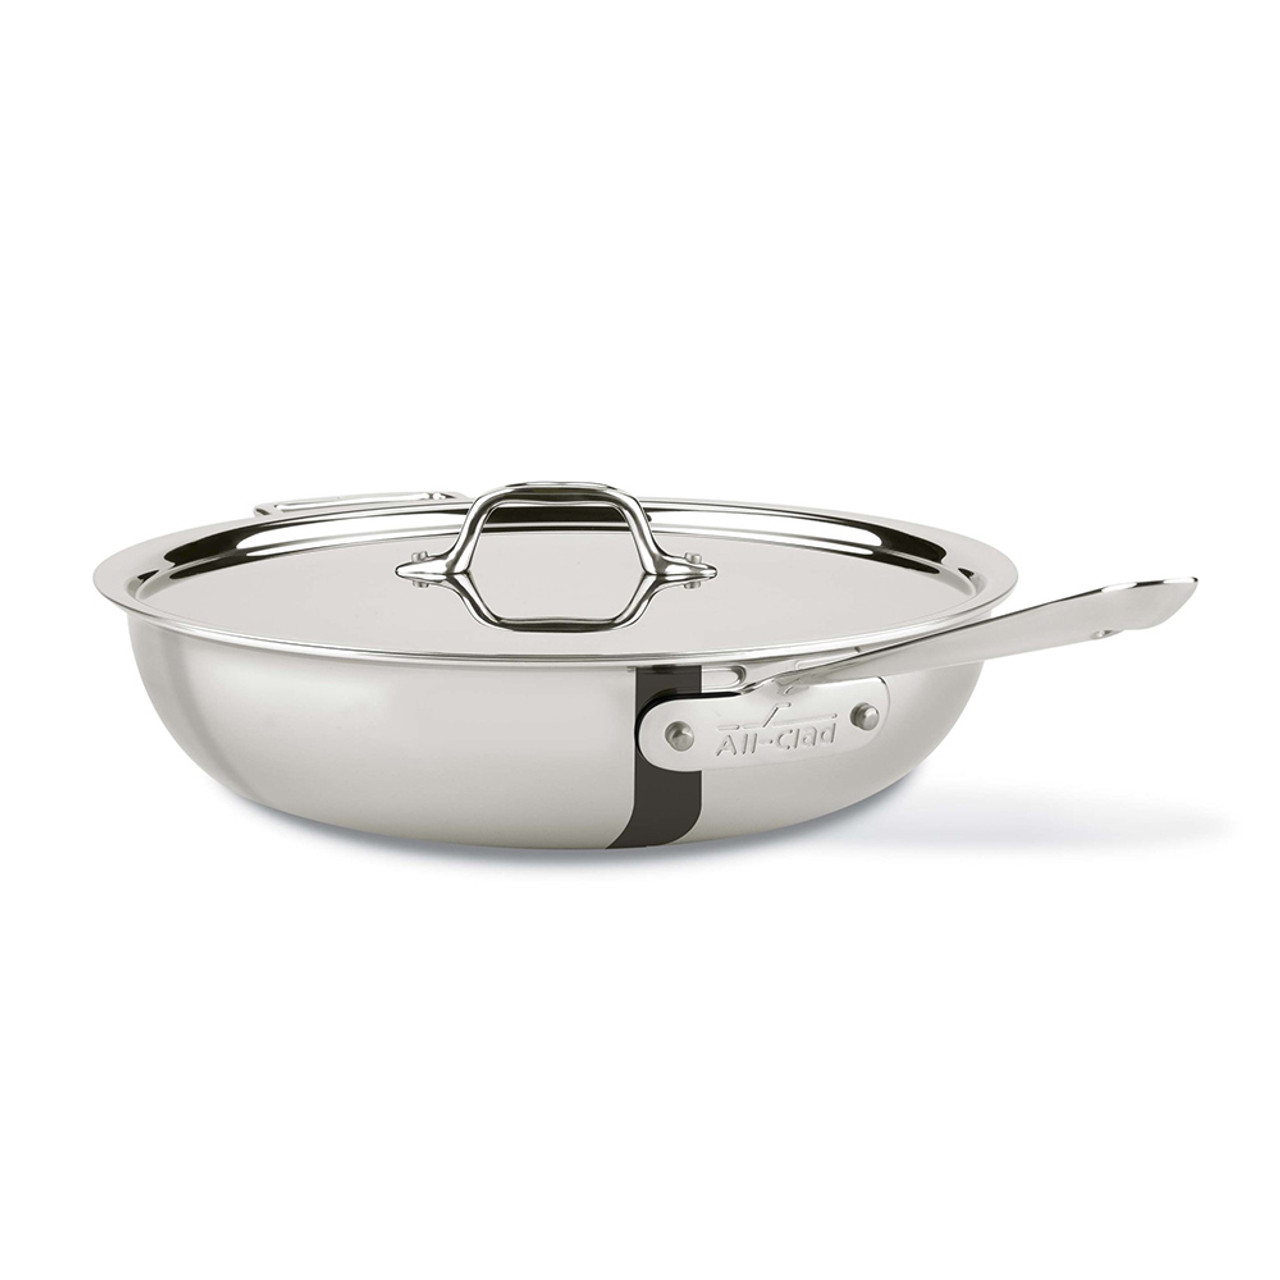 https://cdn11.bigcommerce.com/s-hccytny0od/images/stencil/1280x1280/products/3819/13794/all-clad-d3-stainless-steel-weeknight-pan-4qt__18701.1660594503.jpg?c=2?imbypass=on